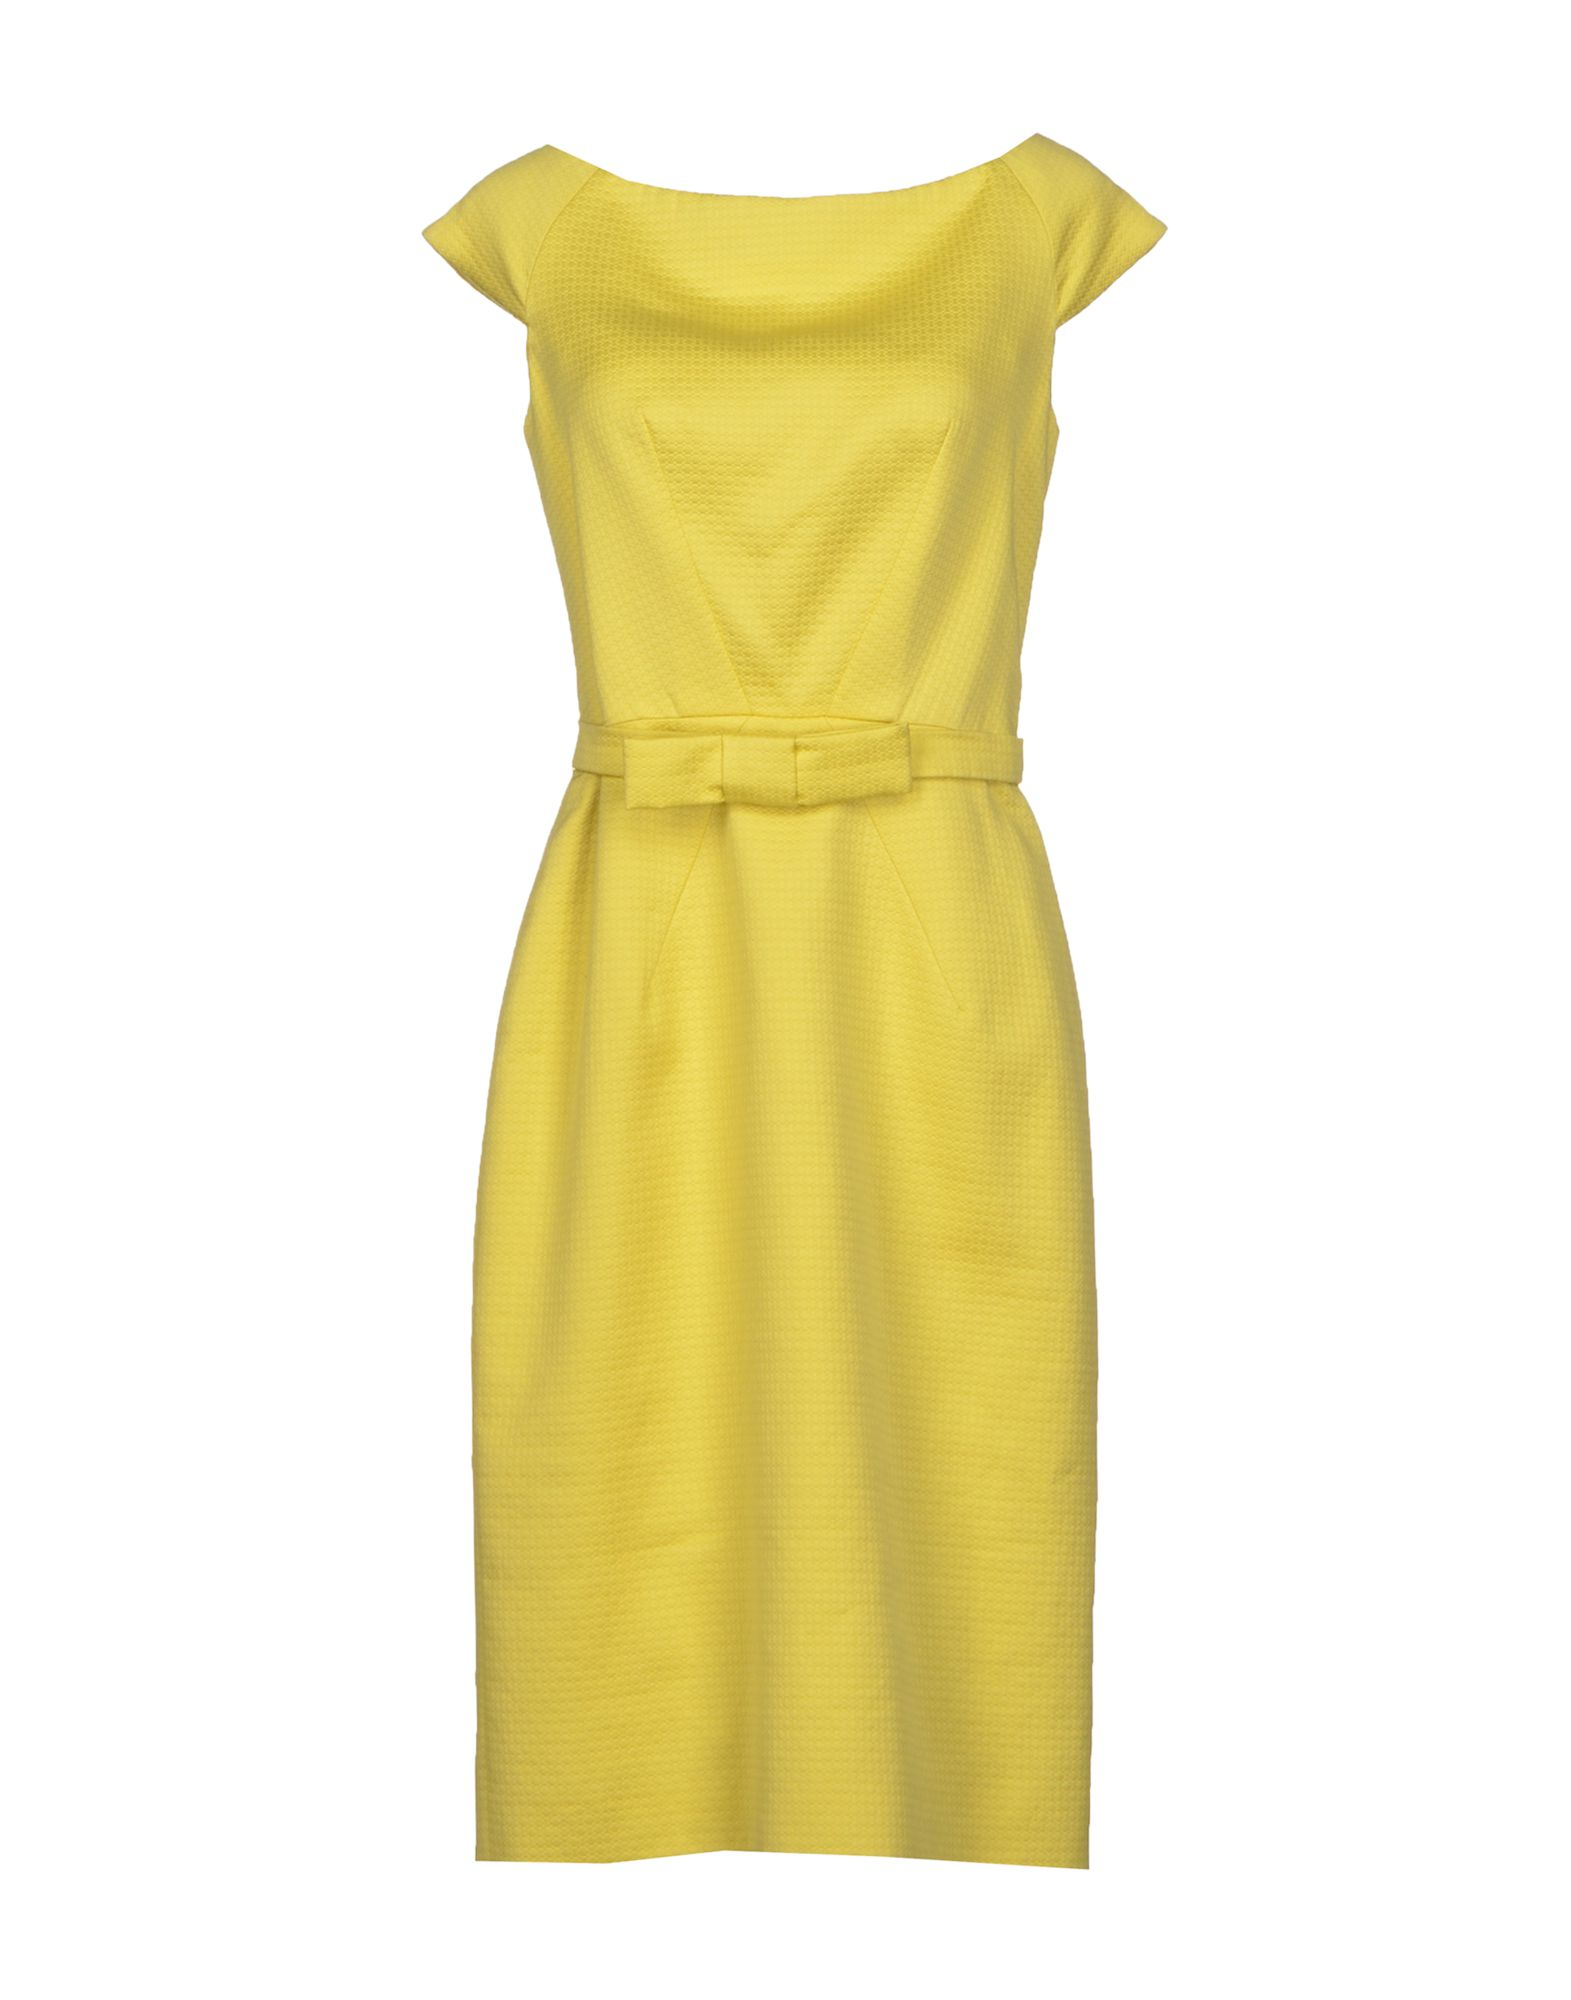 Lyst - Dior Knee-length Dress in Yellow